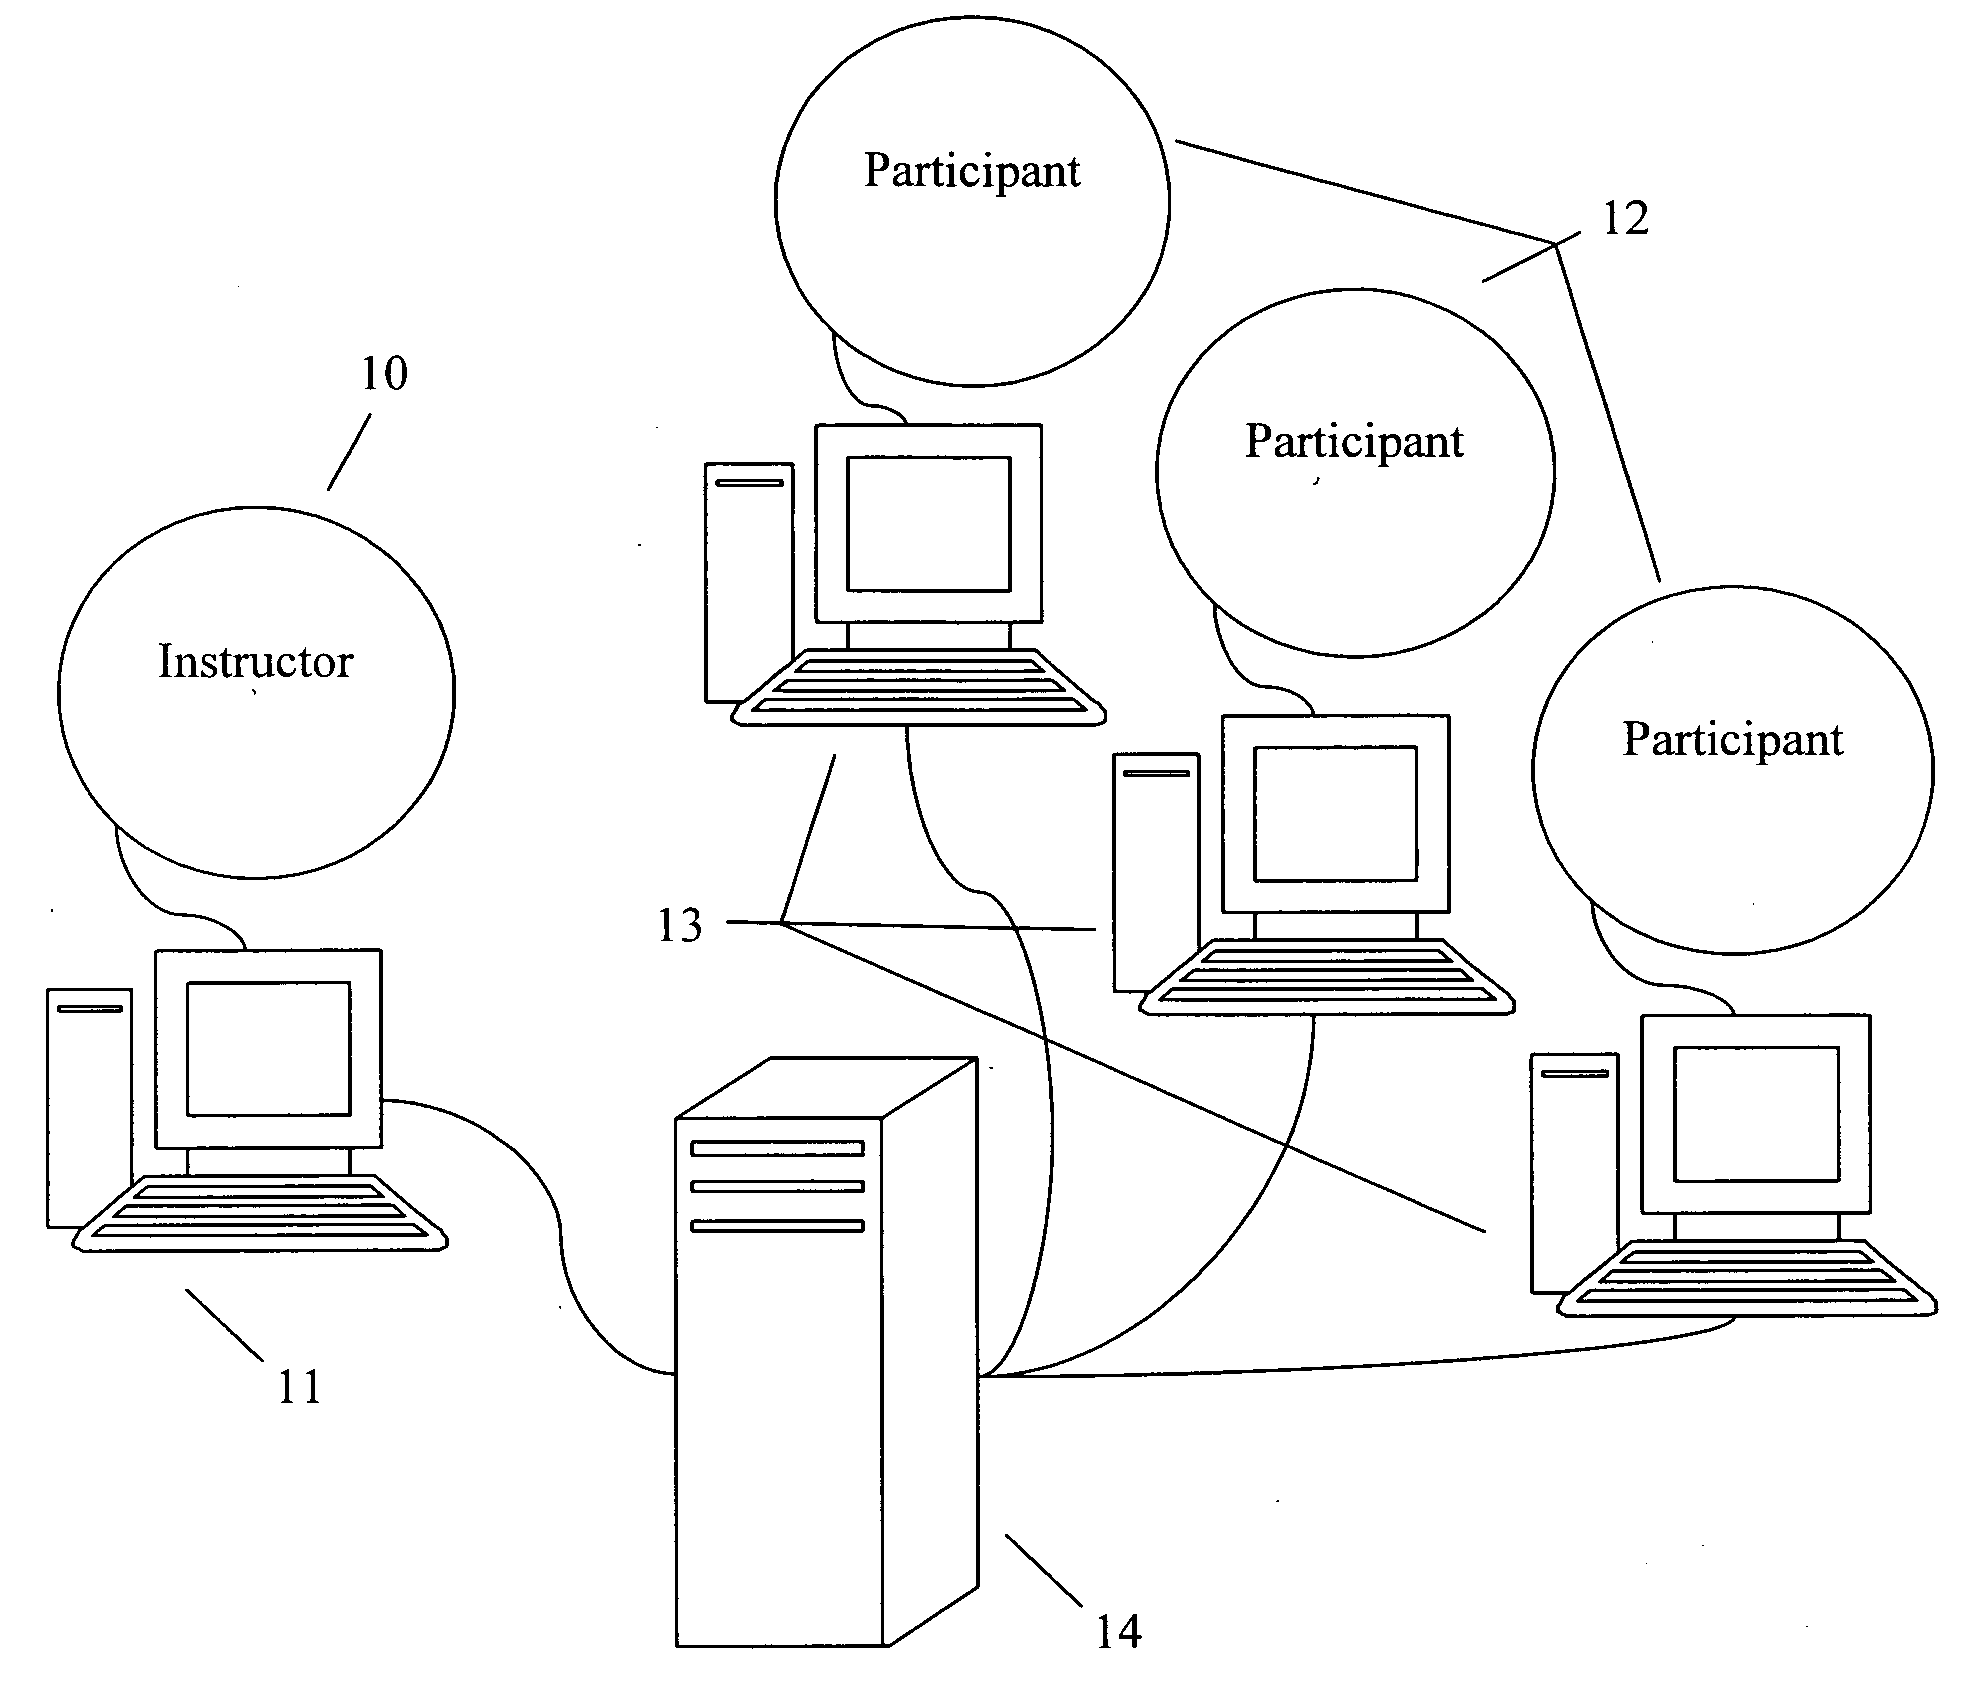 Method and system for computer assisted training and credentialing with follow-up control